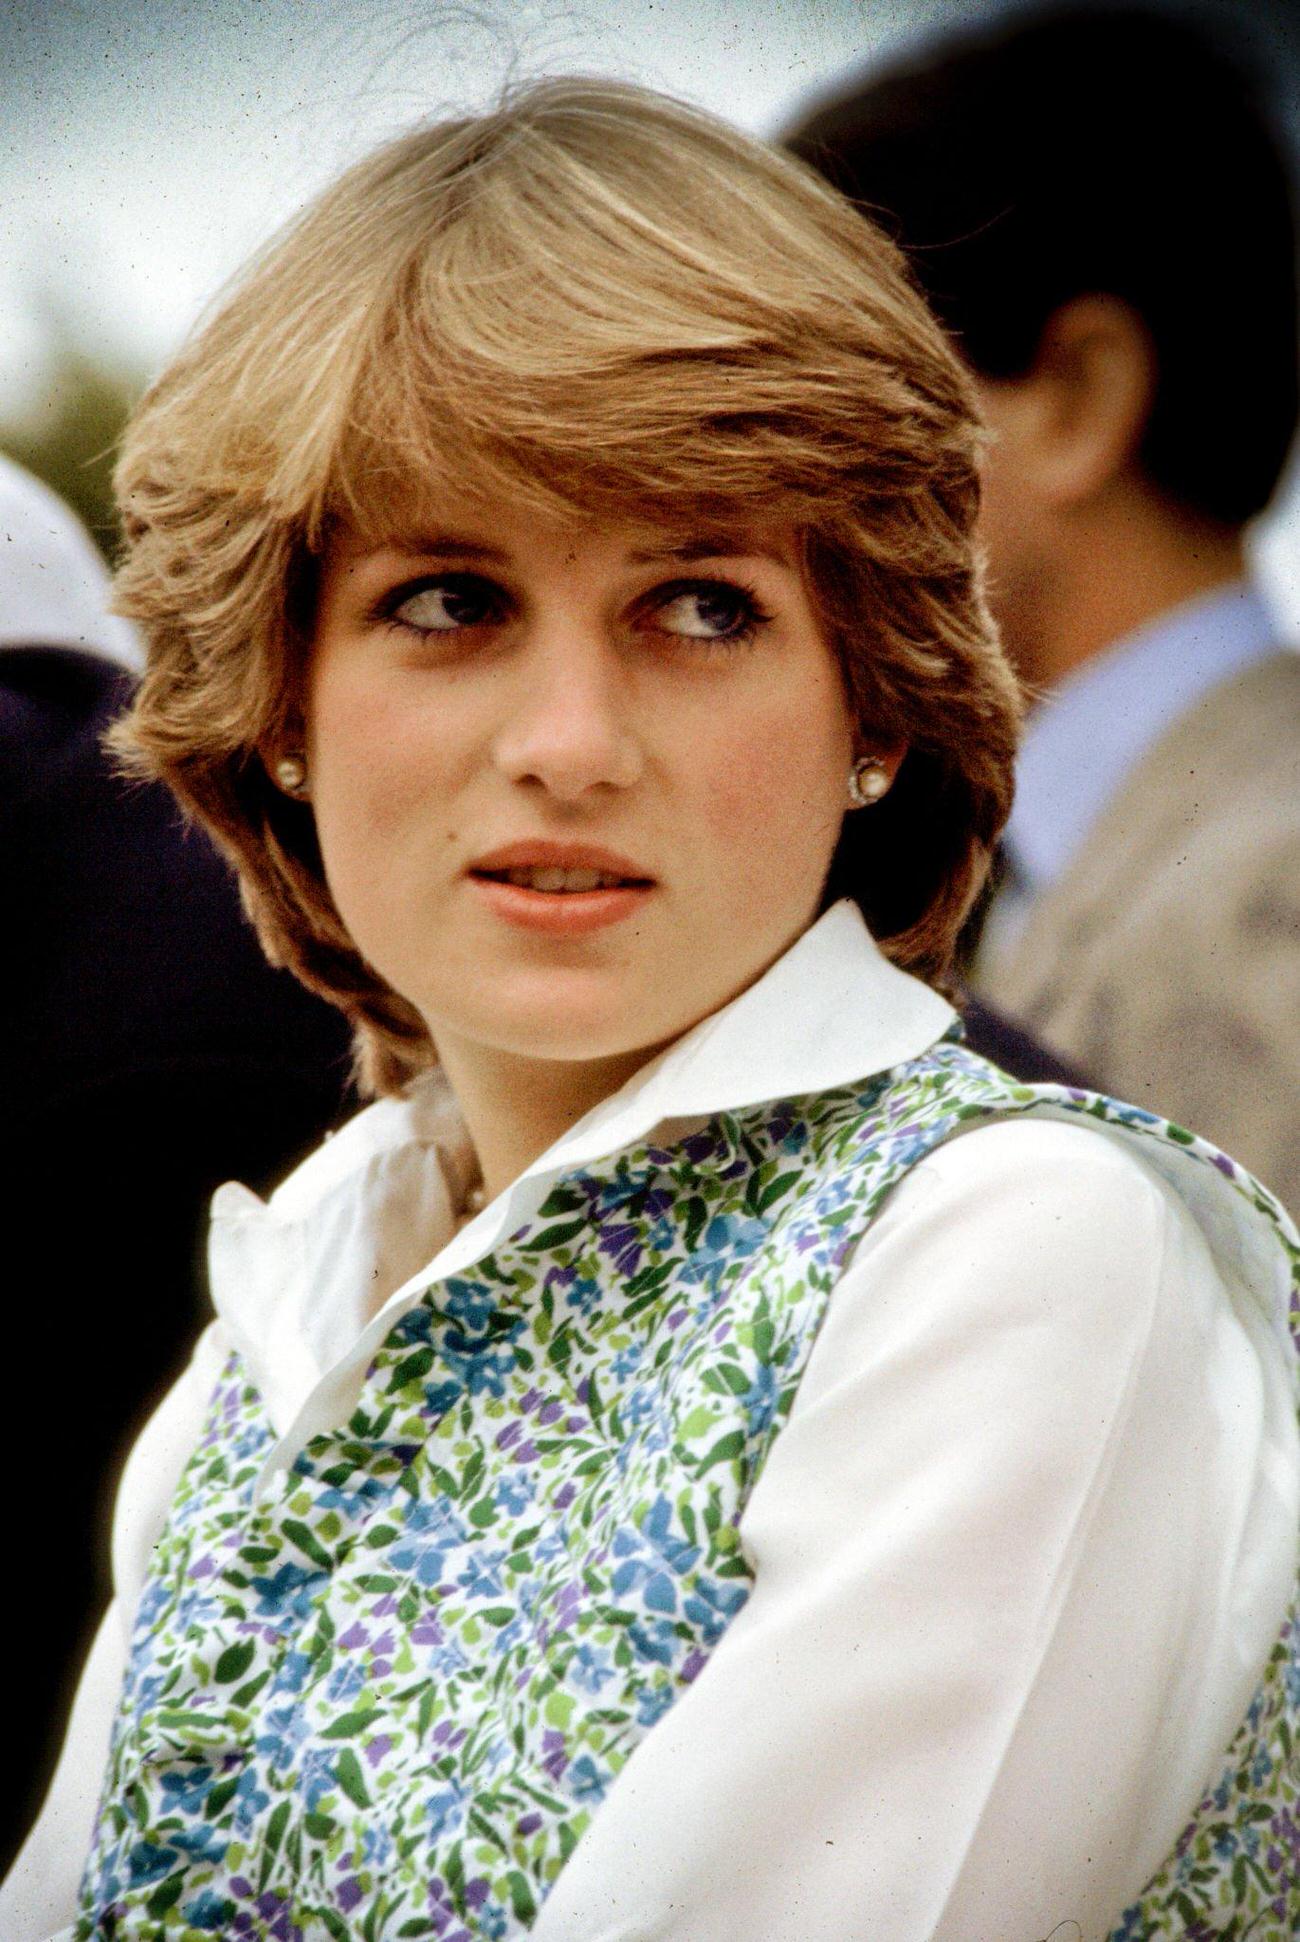 Lady Diana Spencer, the future Diana, Princess of Wales at a polo match in Hampshire, 1981. It was on this occasion that she was driven to tears by press intrusion.